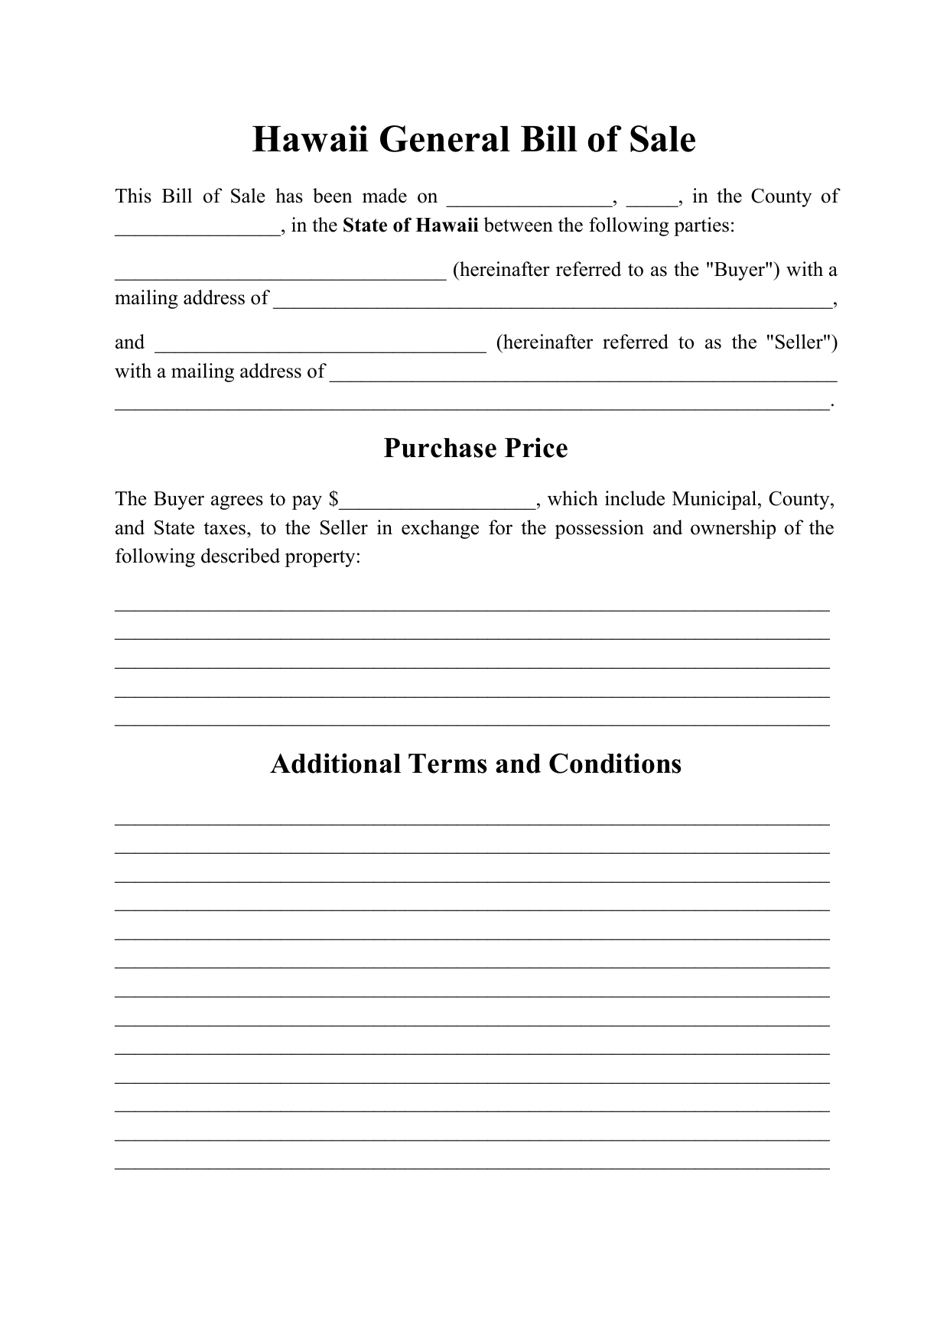 Generic Bill of Sale Form - Hawaii, Page 1